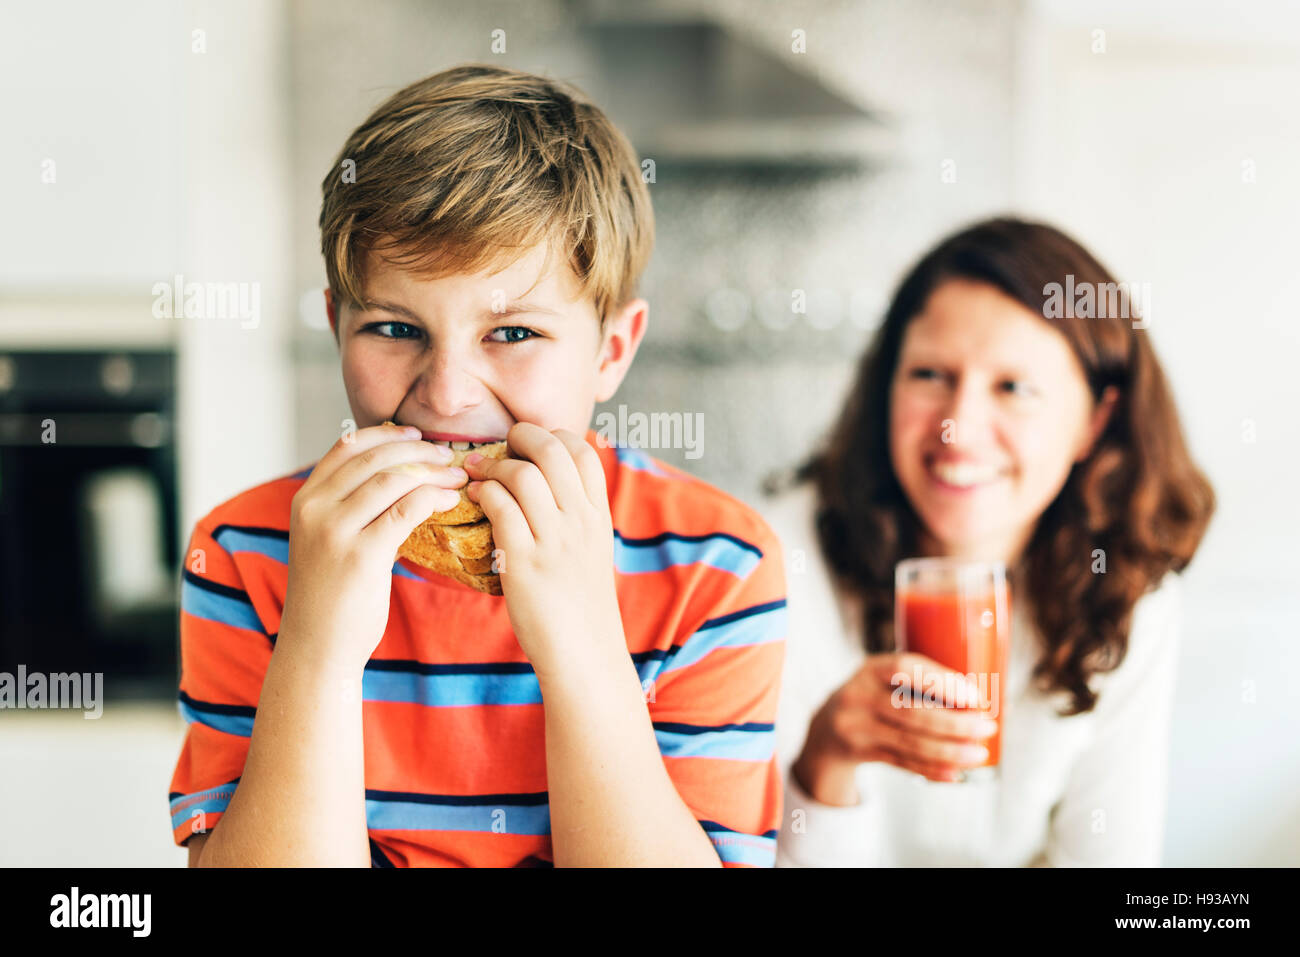 Parent Child Kid Meal Juice Bread Boy Starving Concept Stock Photo